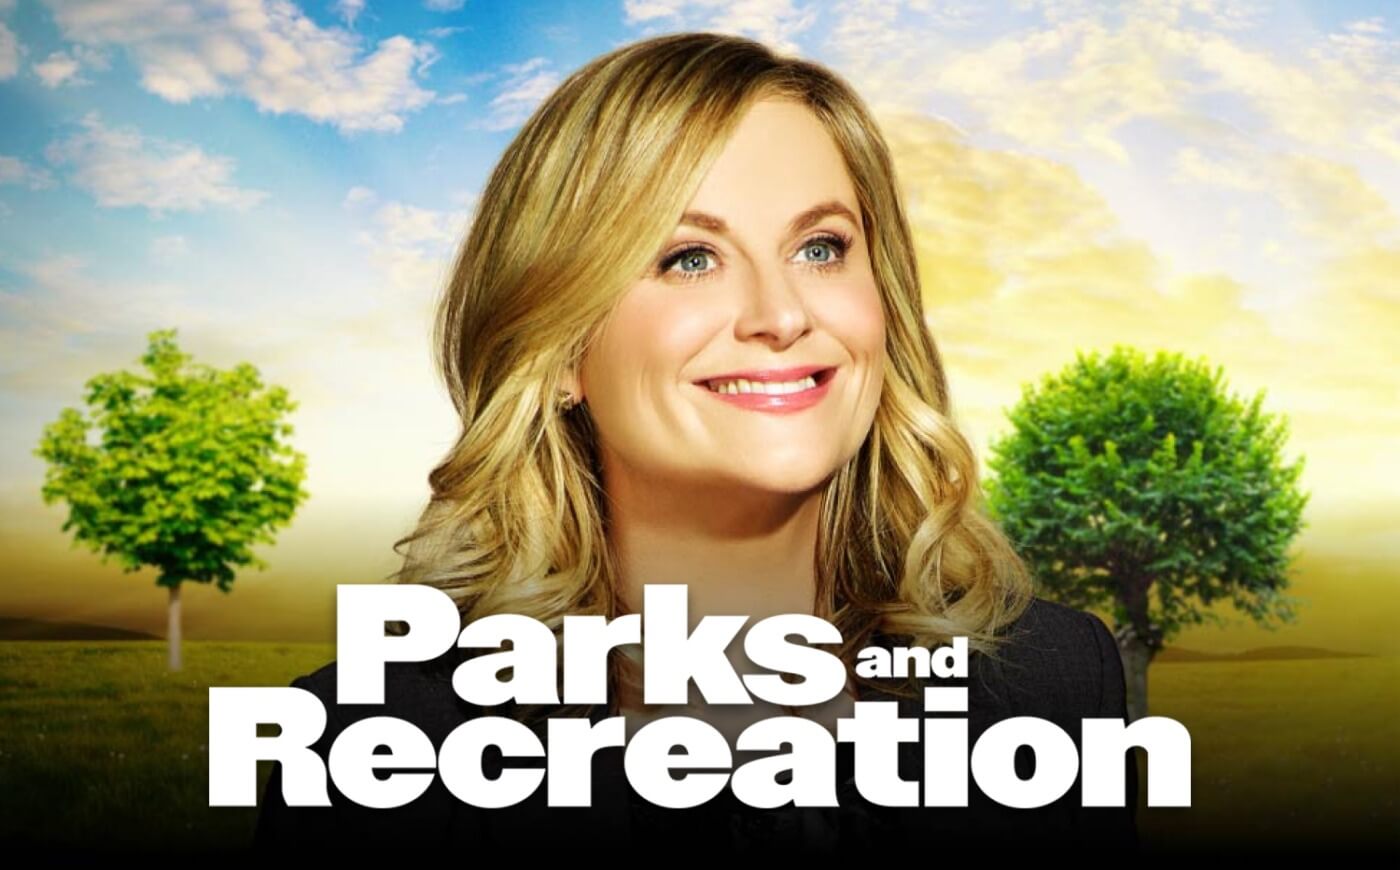 Home And OfficeParks and Recreation Swanson Pyramid of Greatness Poster - 18x24